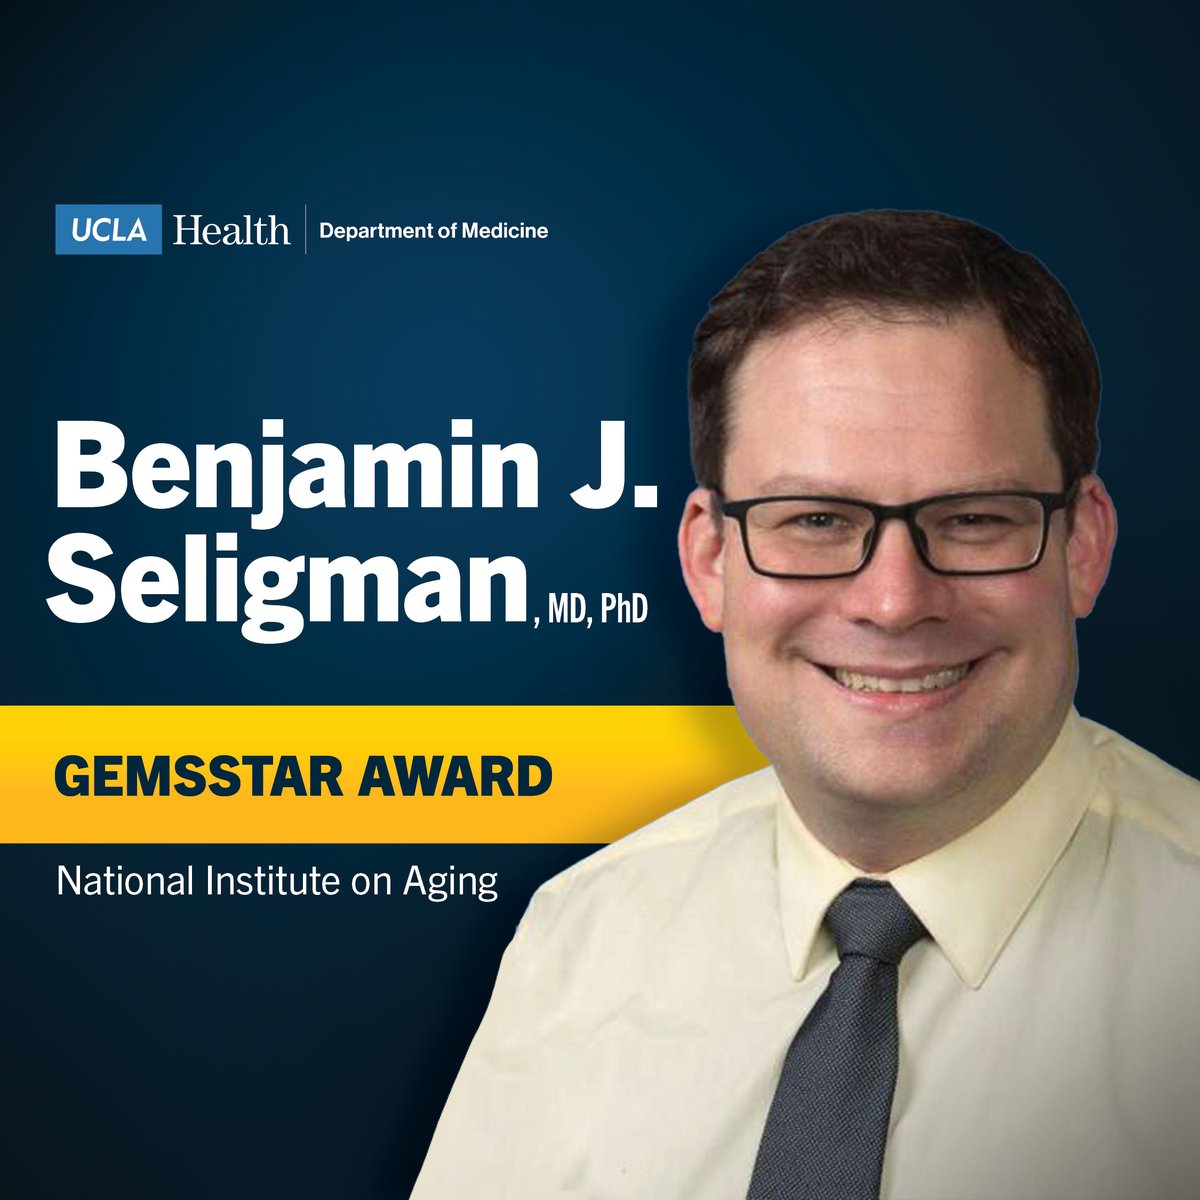 Congrats to Dr. Benjamin Seligman, awarded a GEMSSTAR Award from @NIHAging to study whether frailty alters the effectiveness of the seasonal flu vaccine among different groups of older adults: those aged 65 and above and those aged 50-64. Learn more: bit.ly/440PJbH